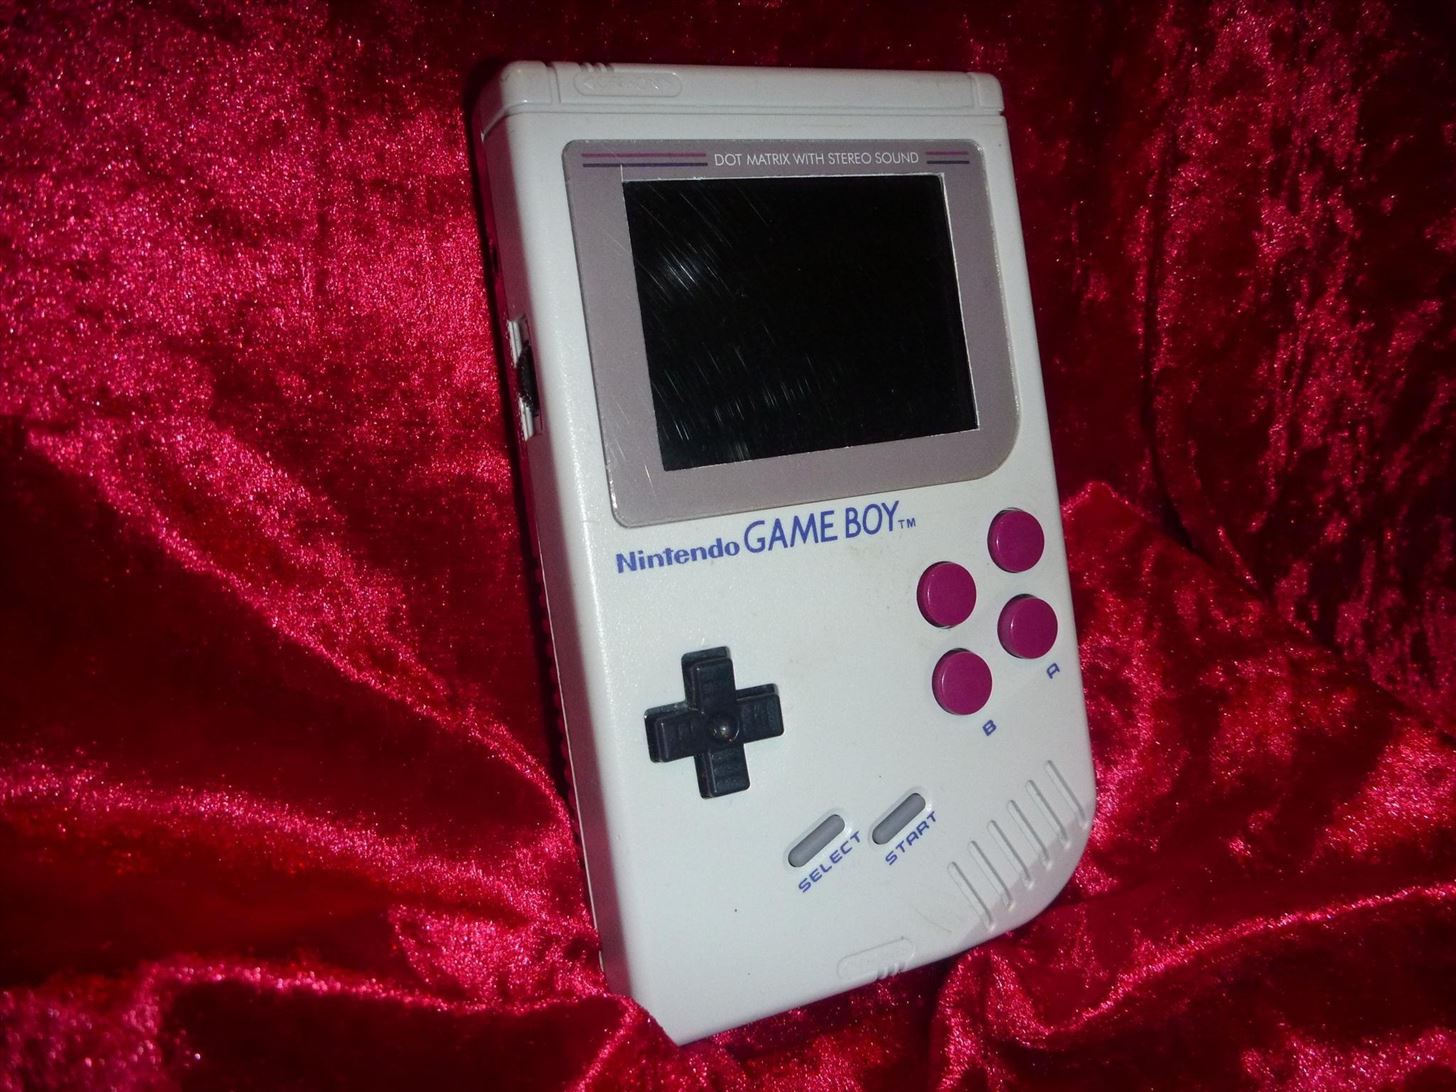 Convert Your Classic Game Boy into a Powerhouse Emulator That Plays Practically Any Retro Game